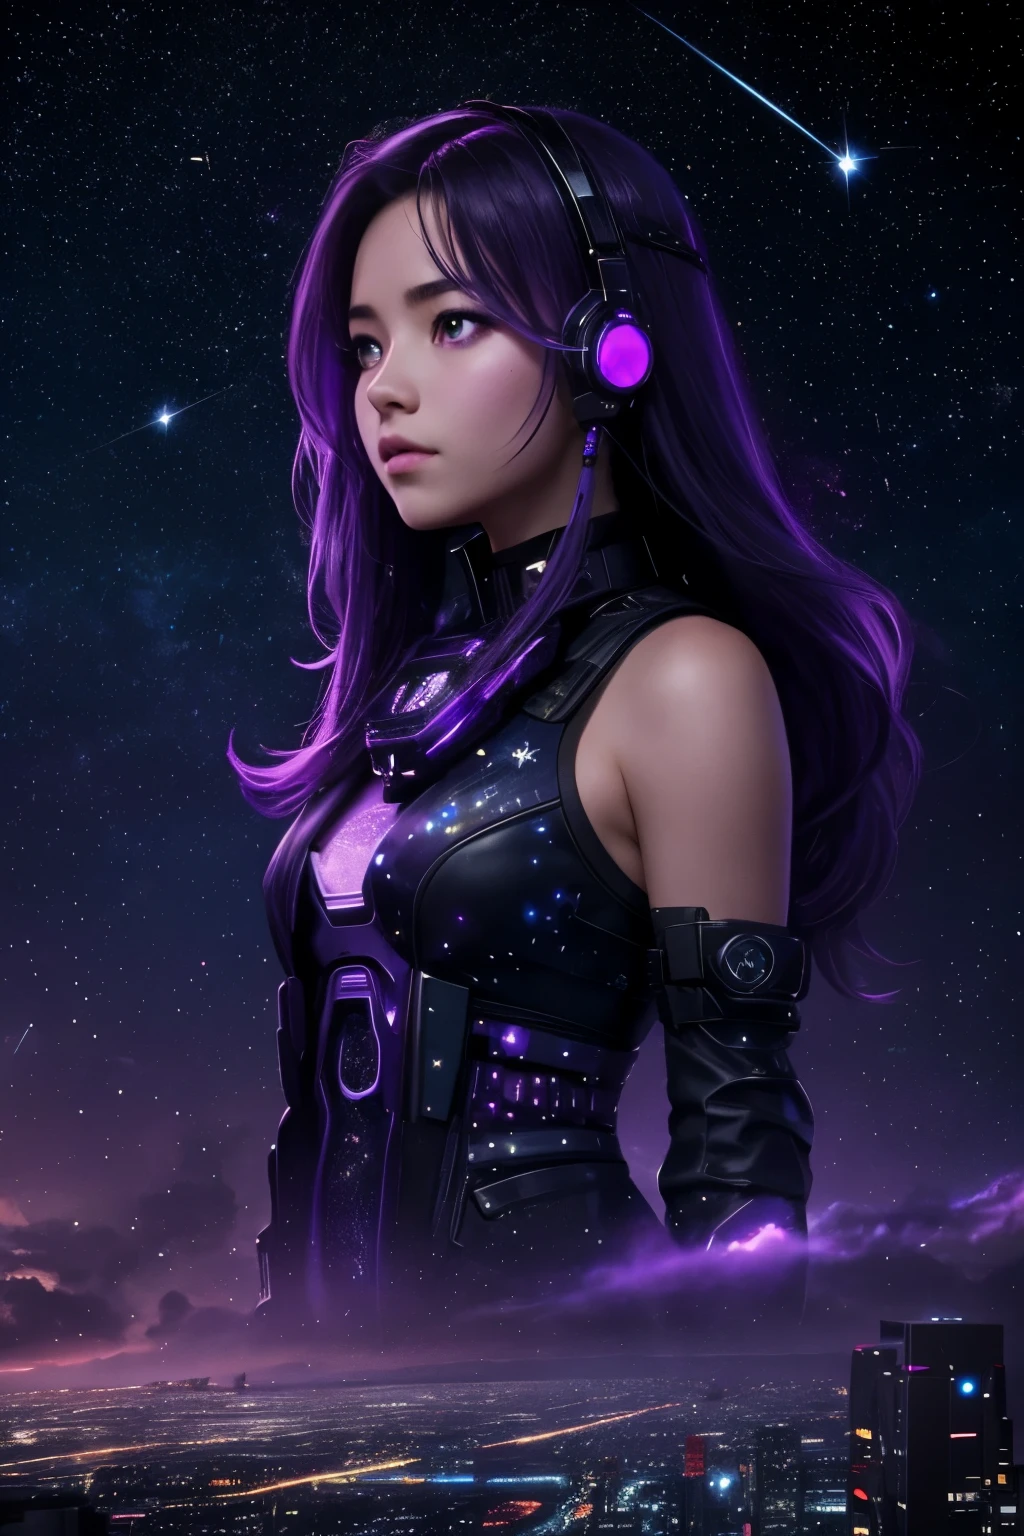 girl under starry sky with the constellations of the zodiac, shades of purple as if they were nebulae, vast space, in background cyberpunk city at the bottom,